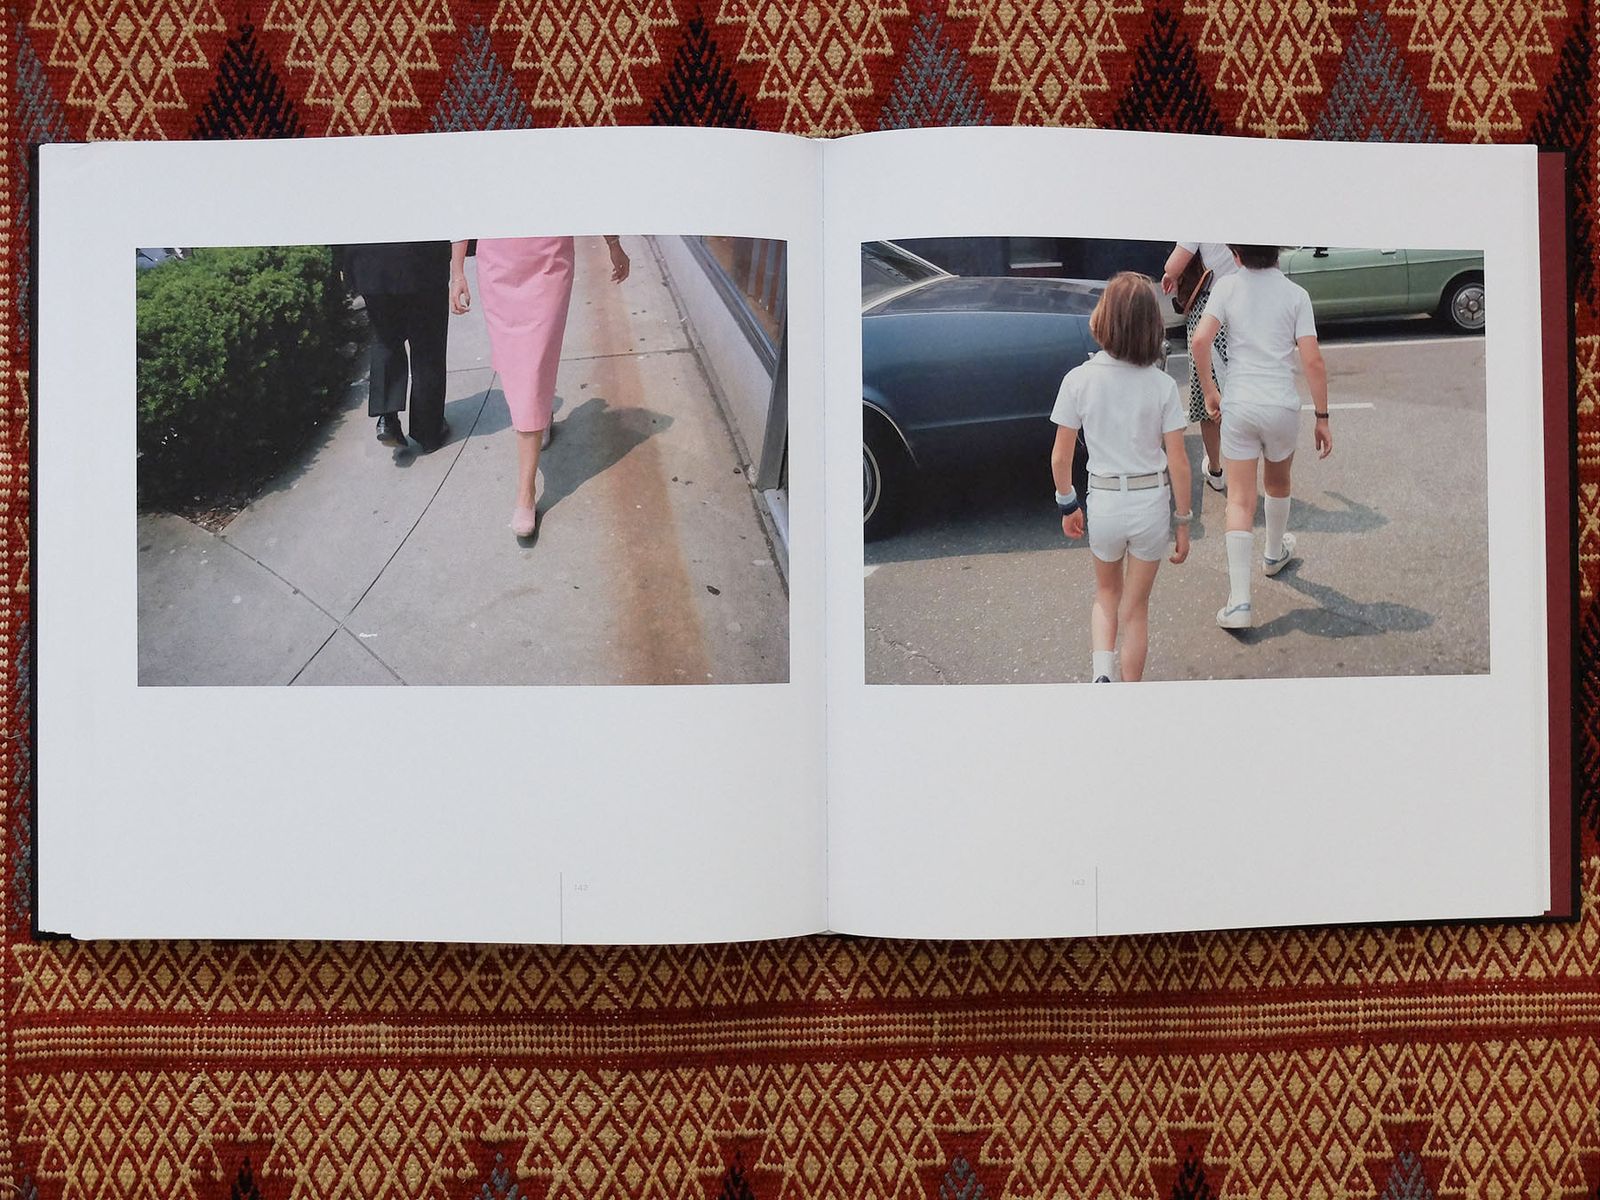 © Leporello Books - Image from the TRANSPARENCIES: SMALL CAMERA WORKS 1971-1979 by Stephen Shore photography project